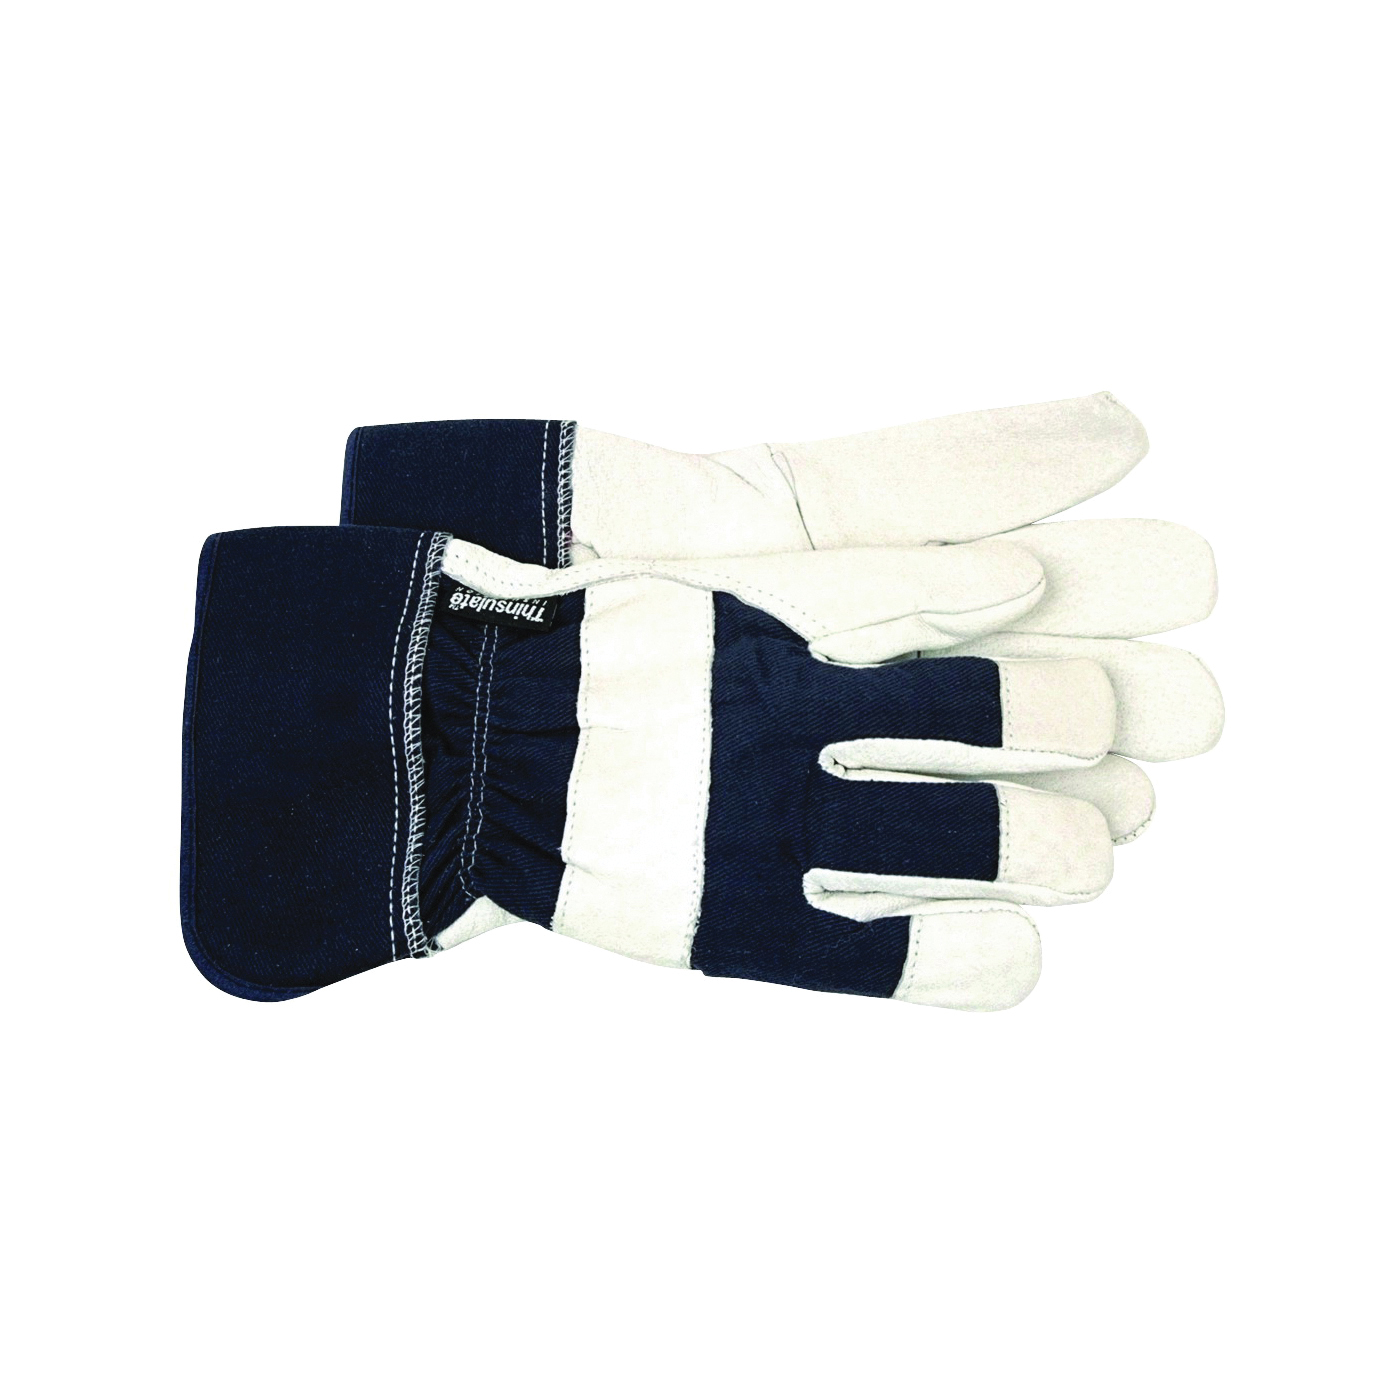 4196L Protective Gloves, Men's, L, Wing Thumb, Safety Cuff, Navy Blue